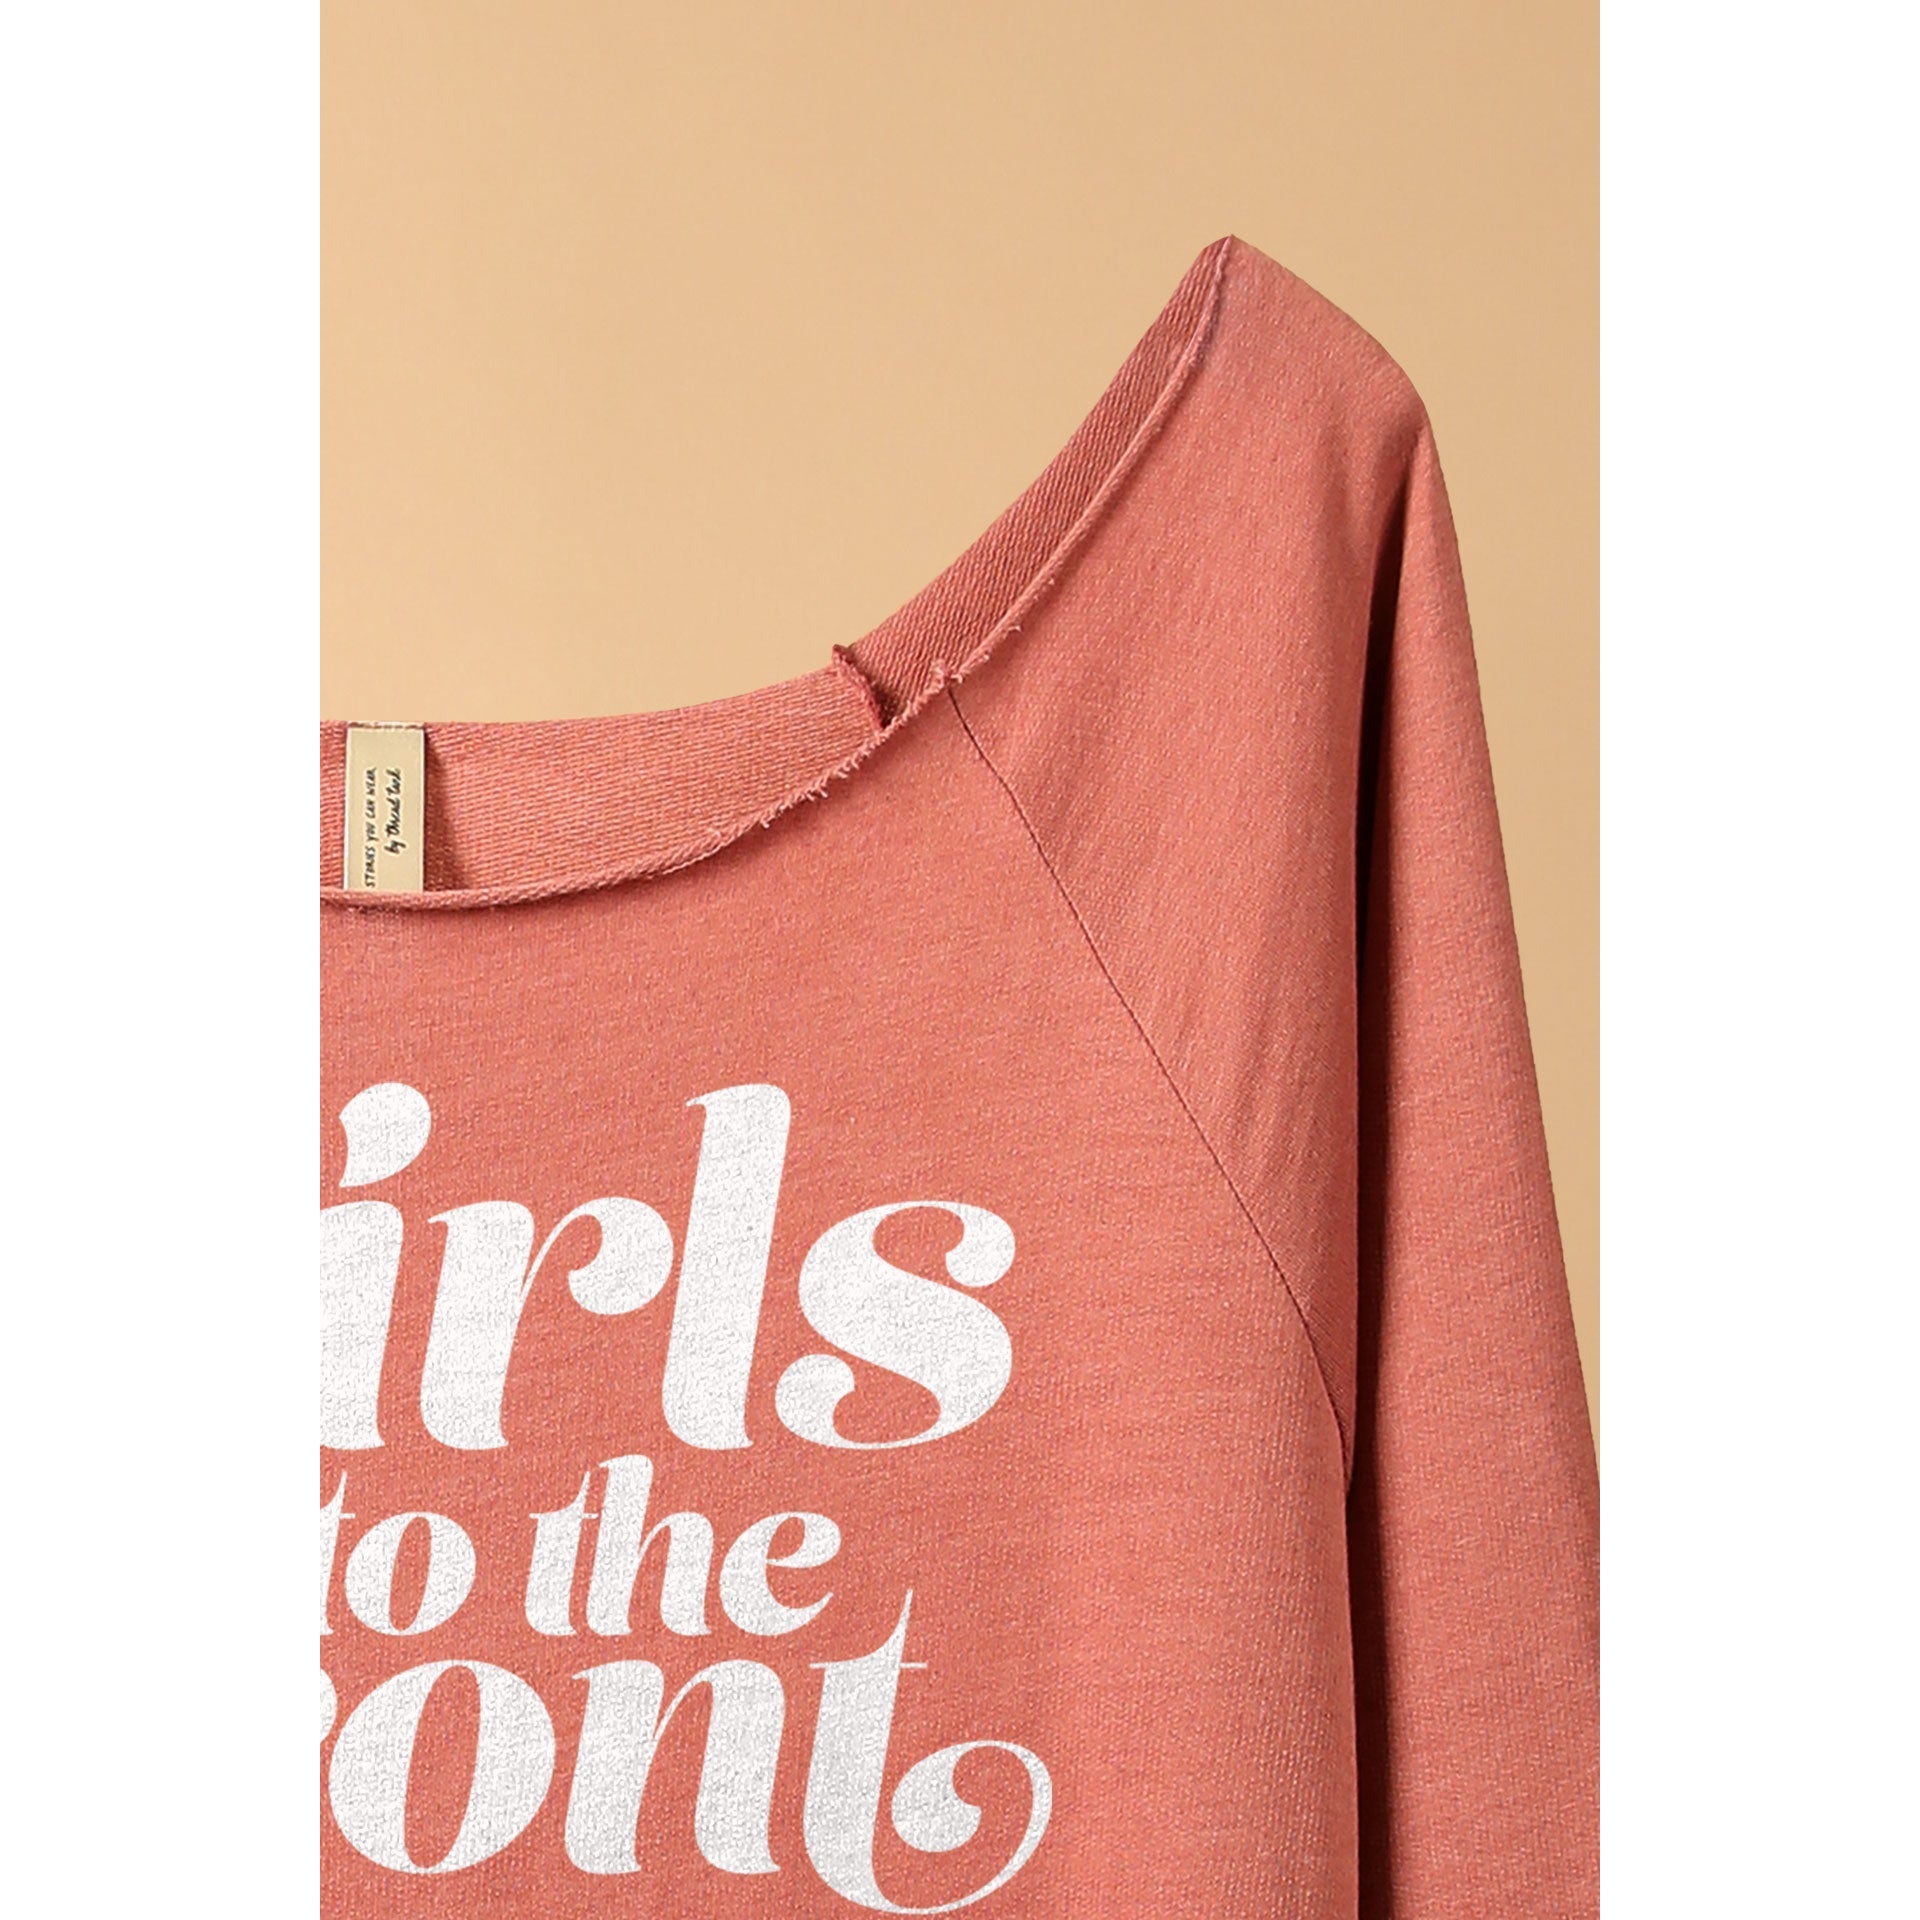 Girls To The Front - threadtank | stories you can wear